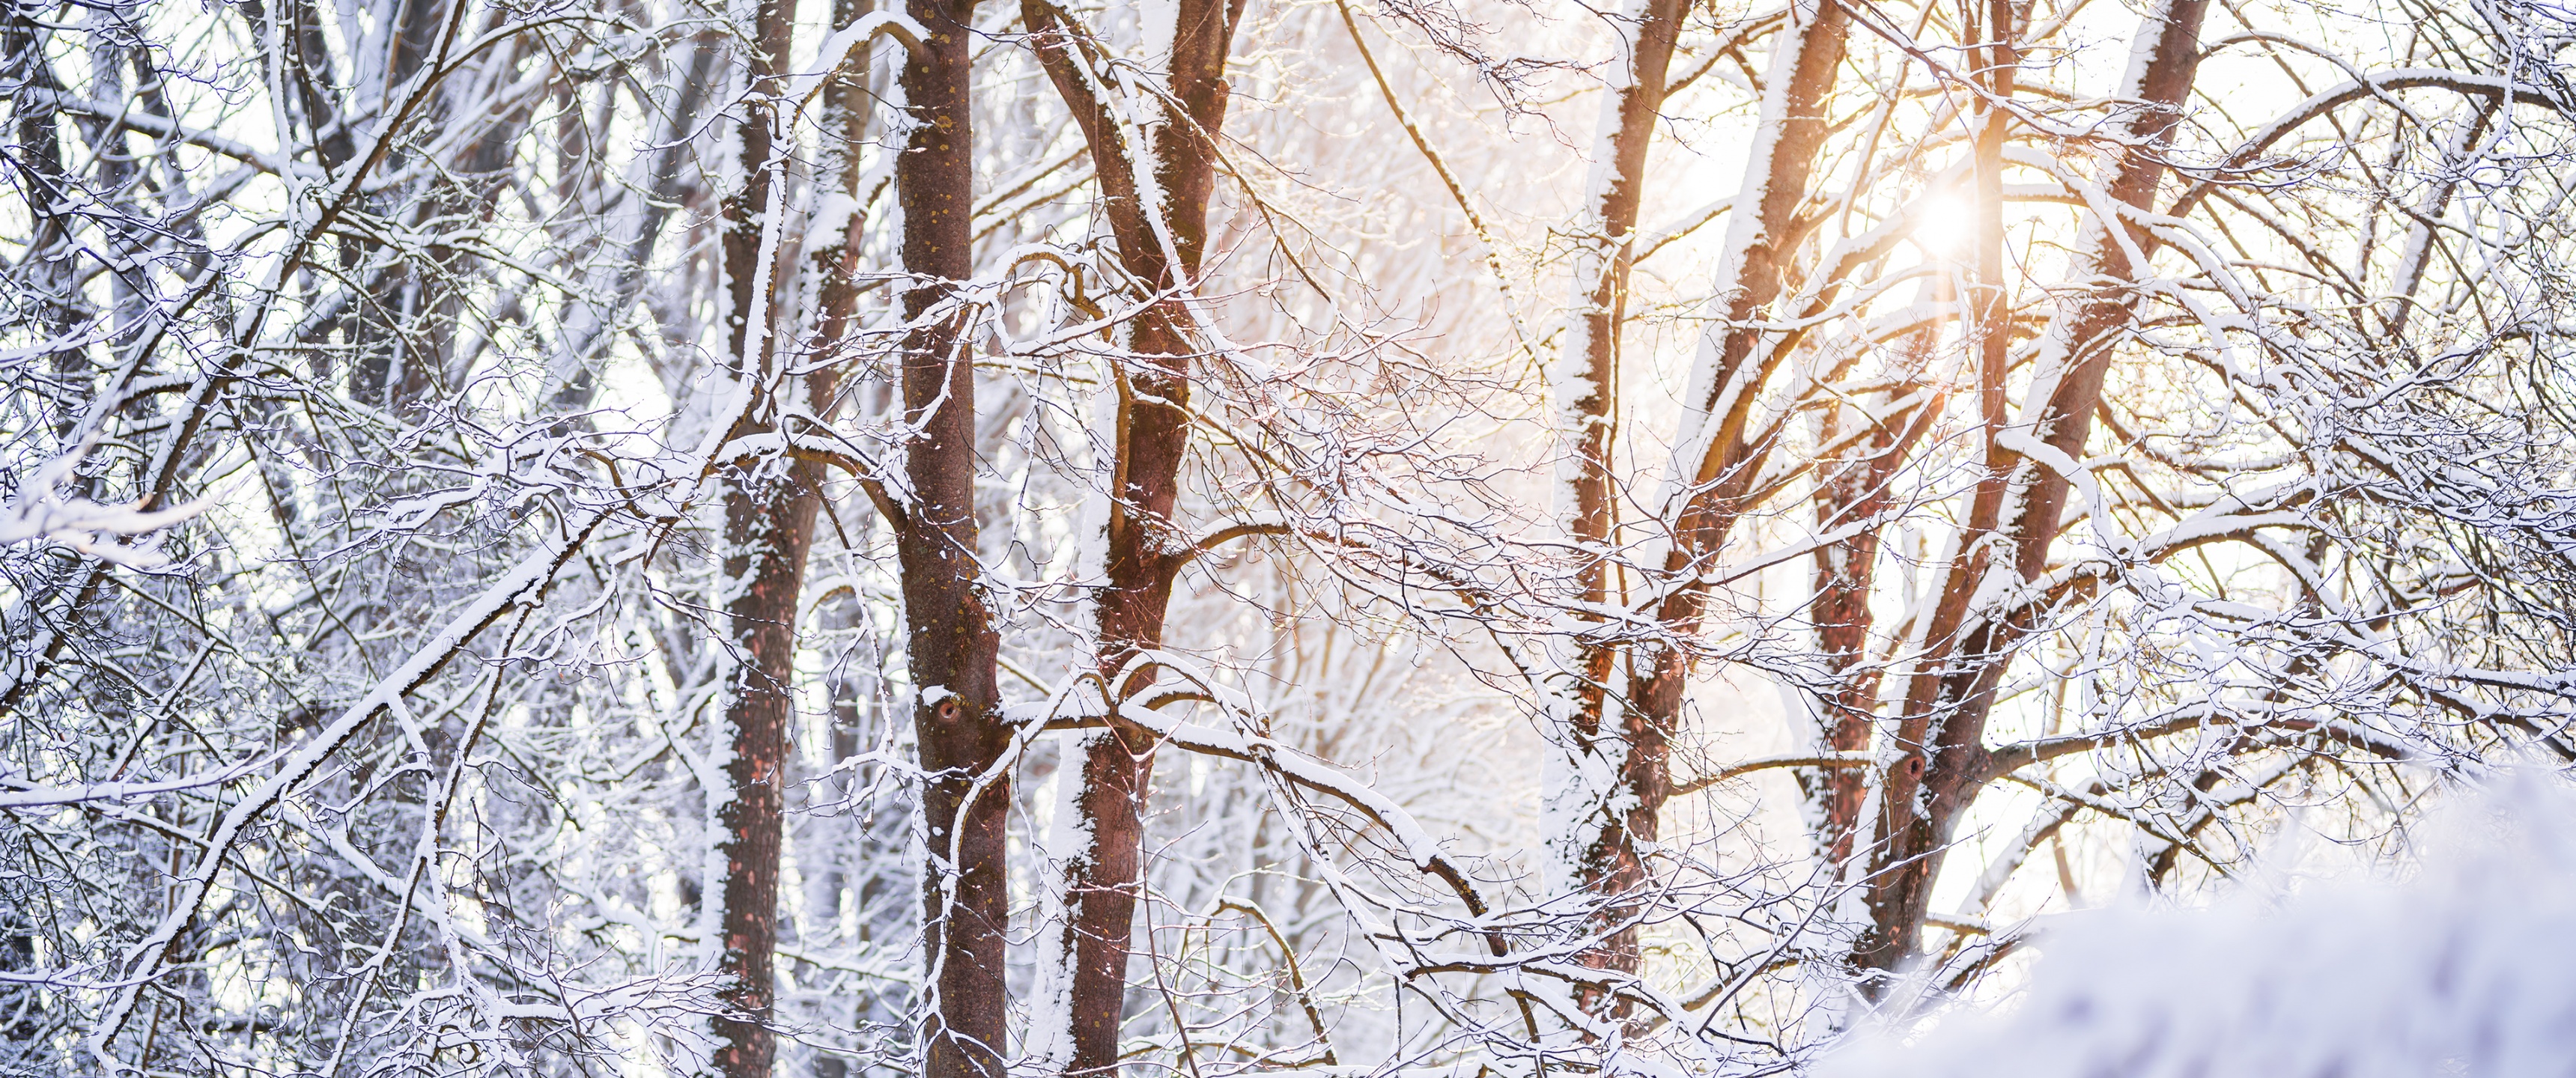 Snow covered Wallpaper 4K, Forest, Tree Branches, Winter, White, Sunlight, Nature